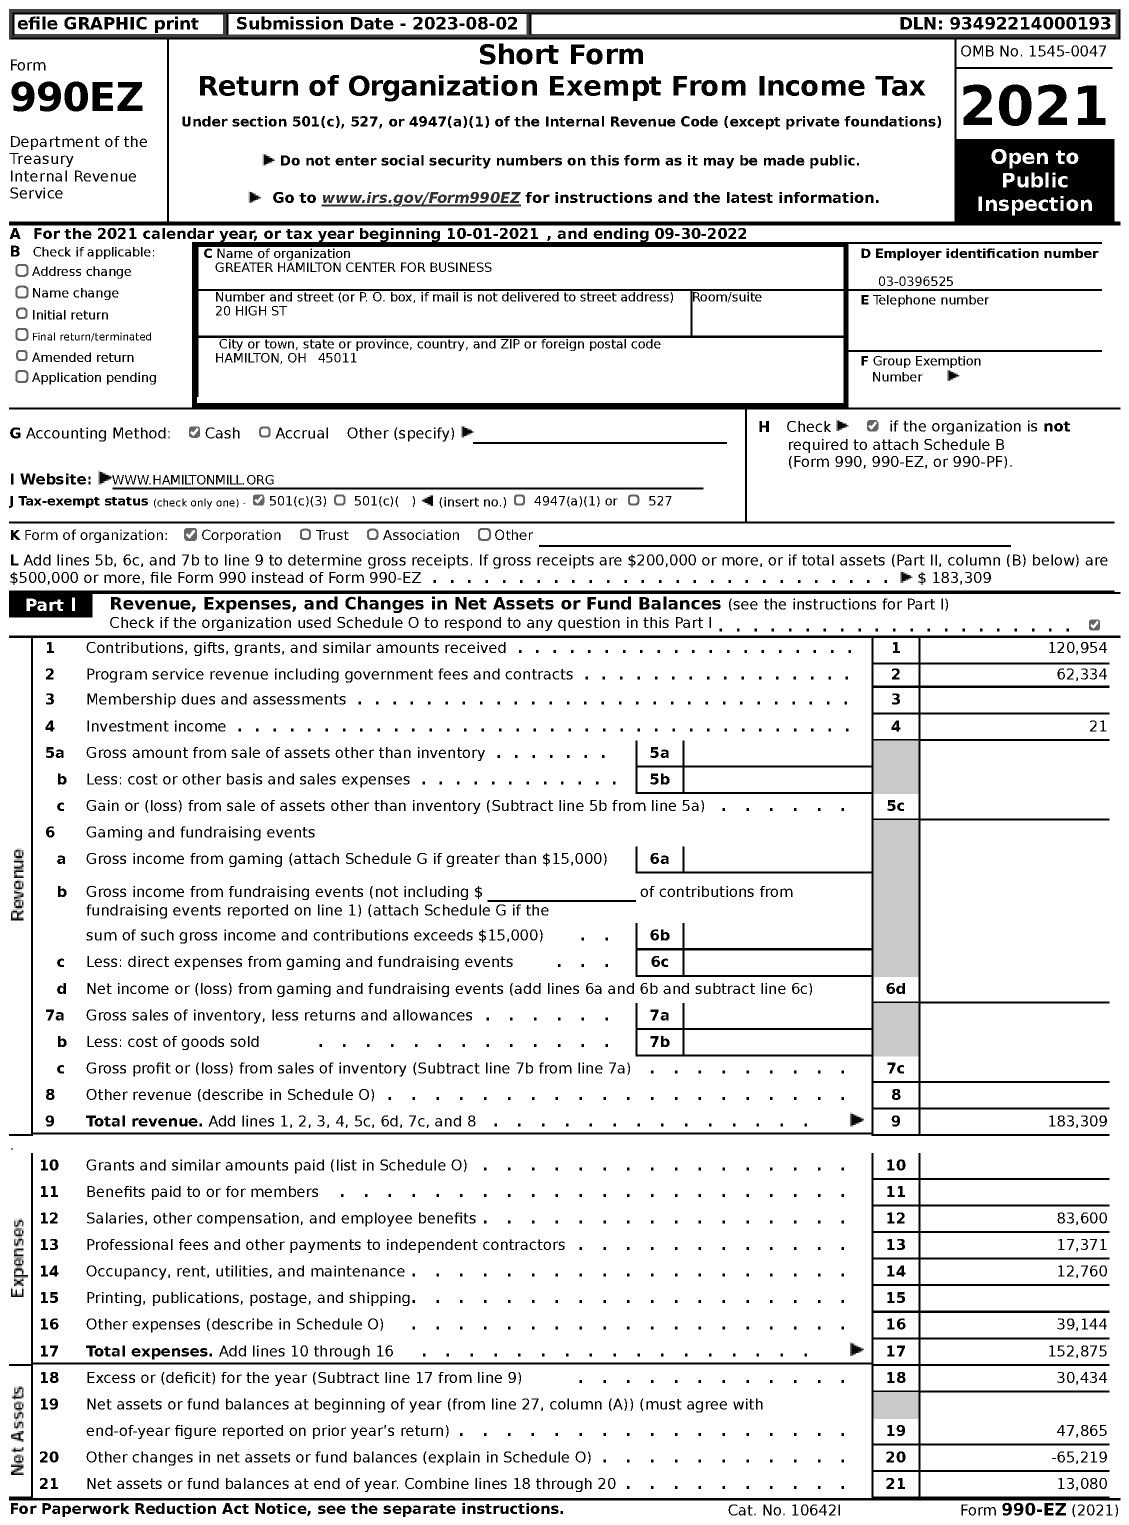 Image of first page of 2021 Form 990EZ for Greater Hamilton Center for Business